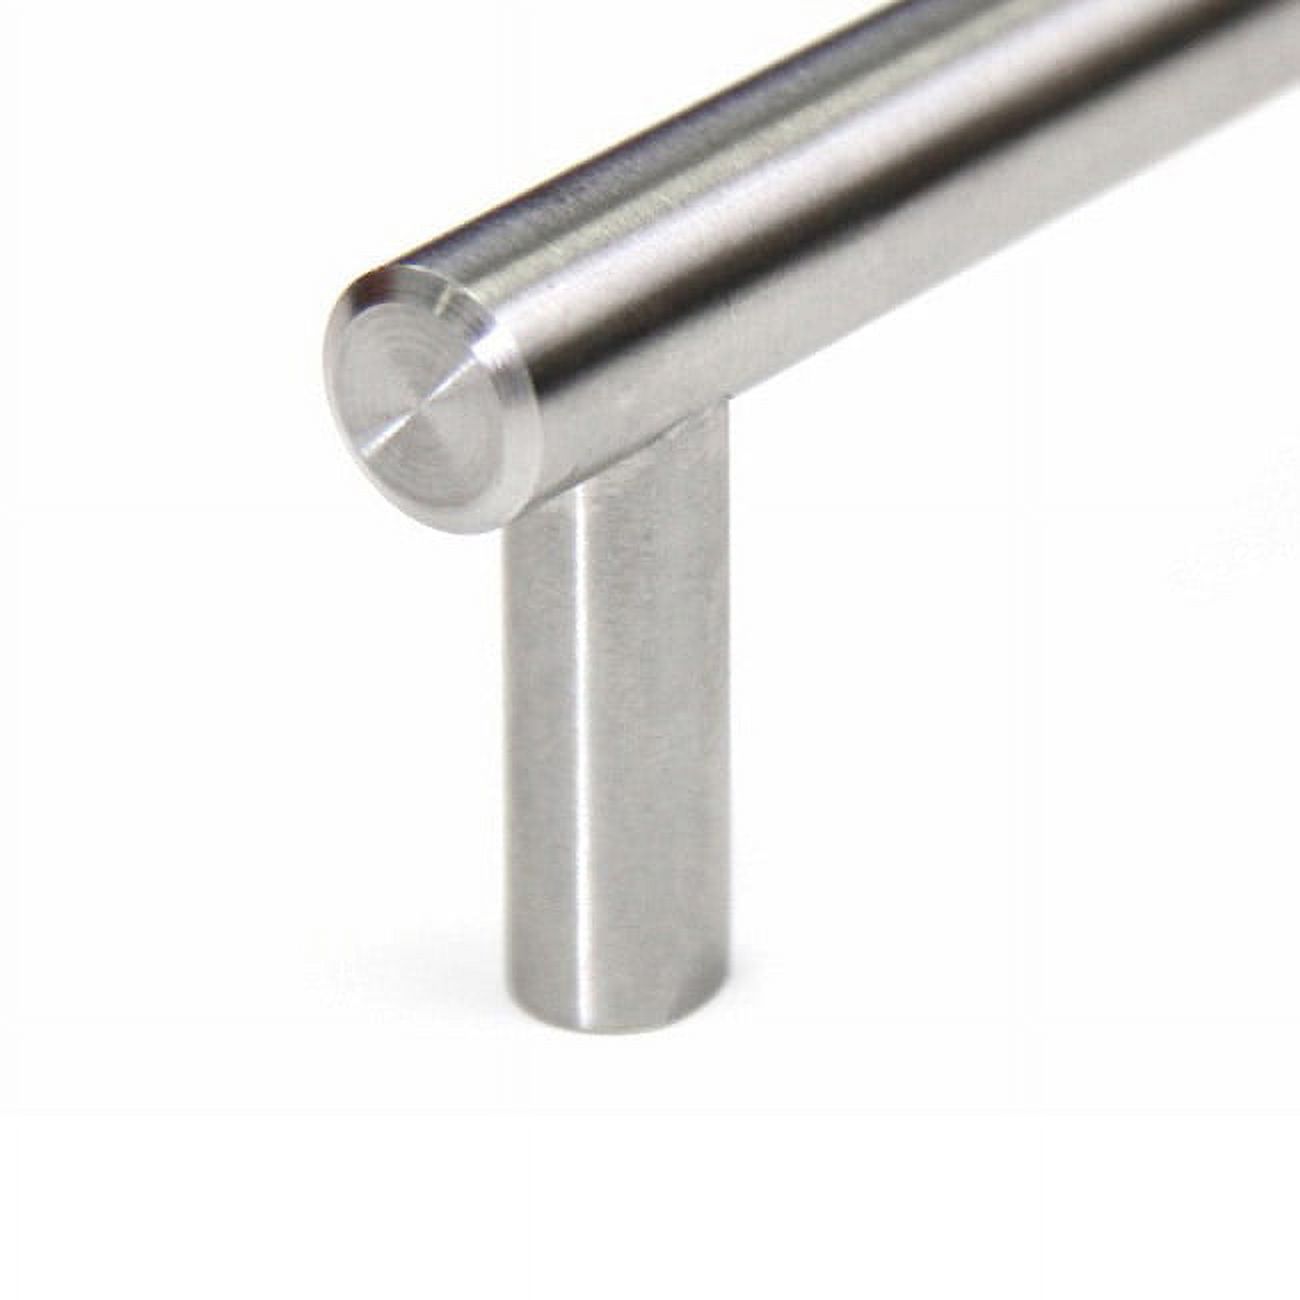 22" Solid Stainless Steel Cabinet Bar Pull Handles 22-inch Stainless Steel Cabinet Bar Pull Handles (Case of 10) - image 3 of 3